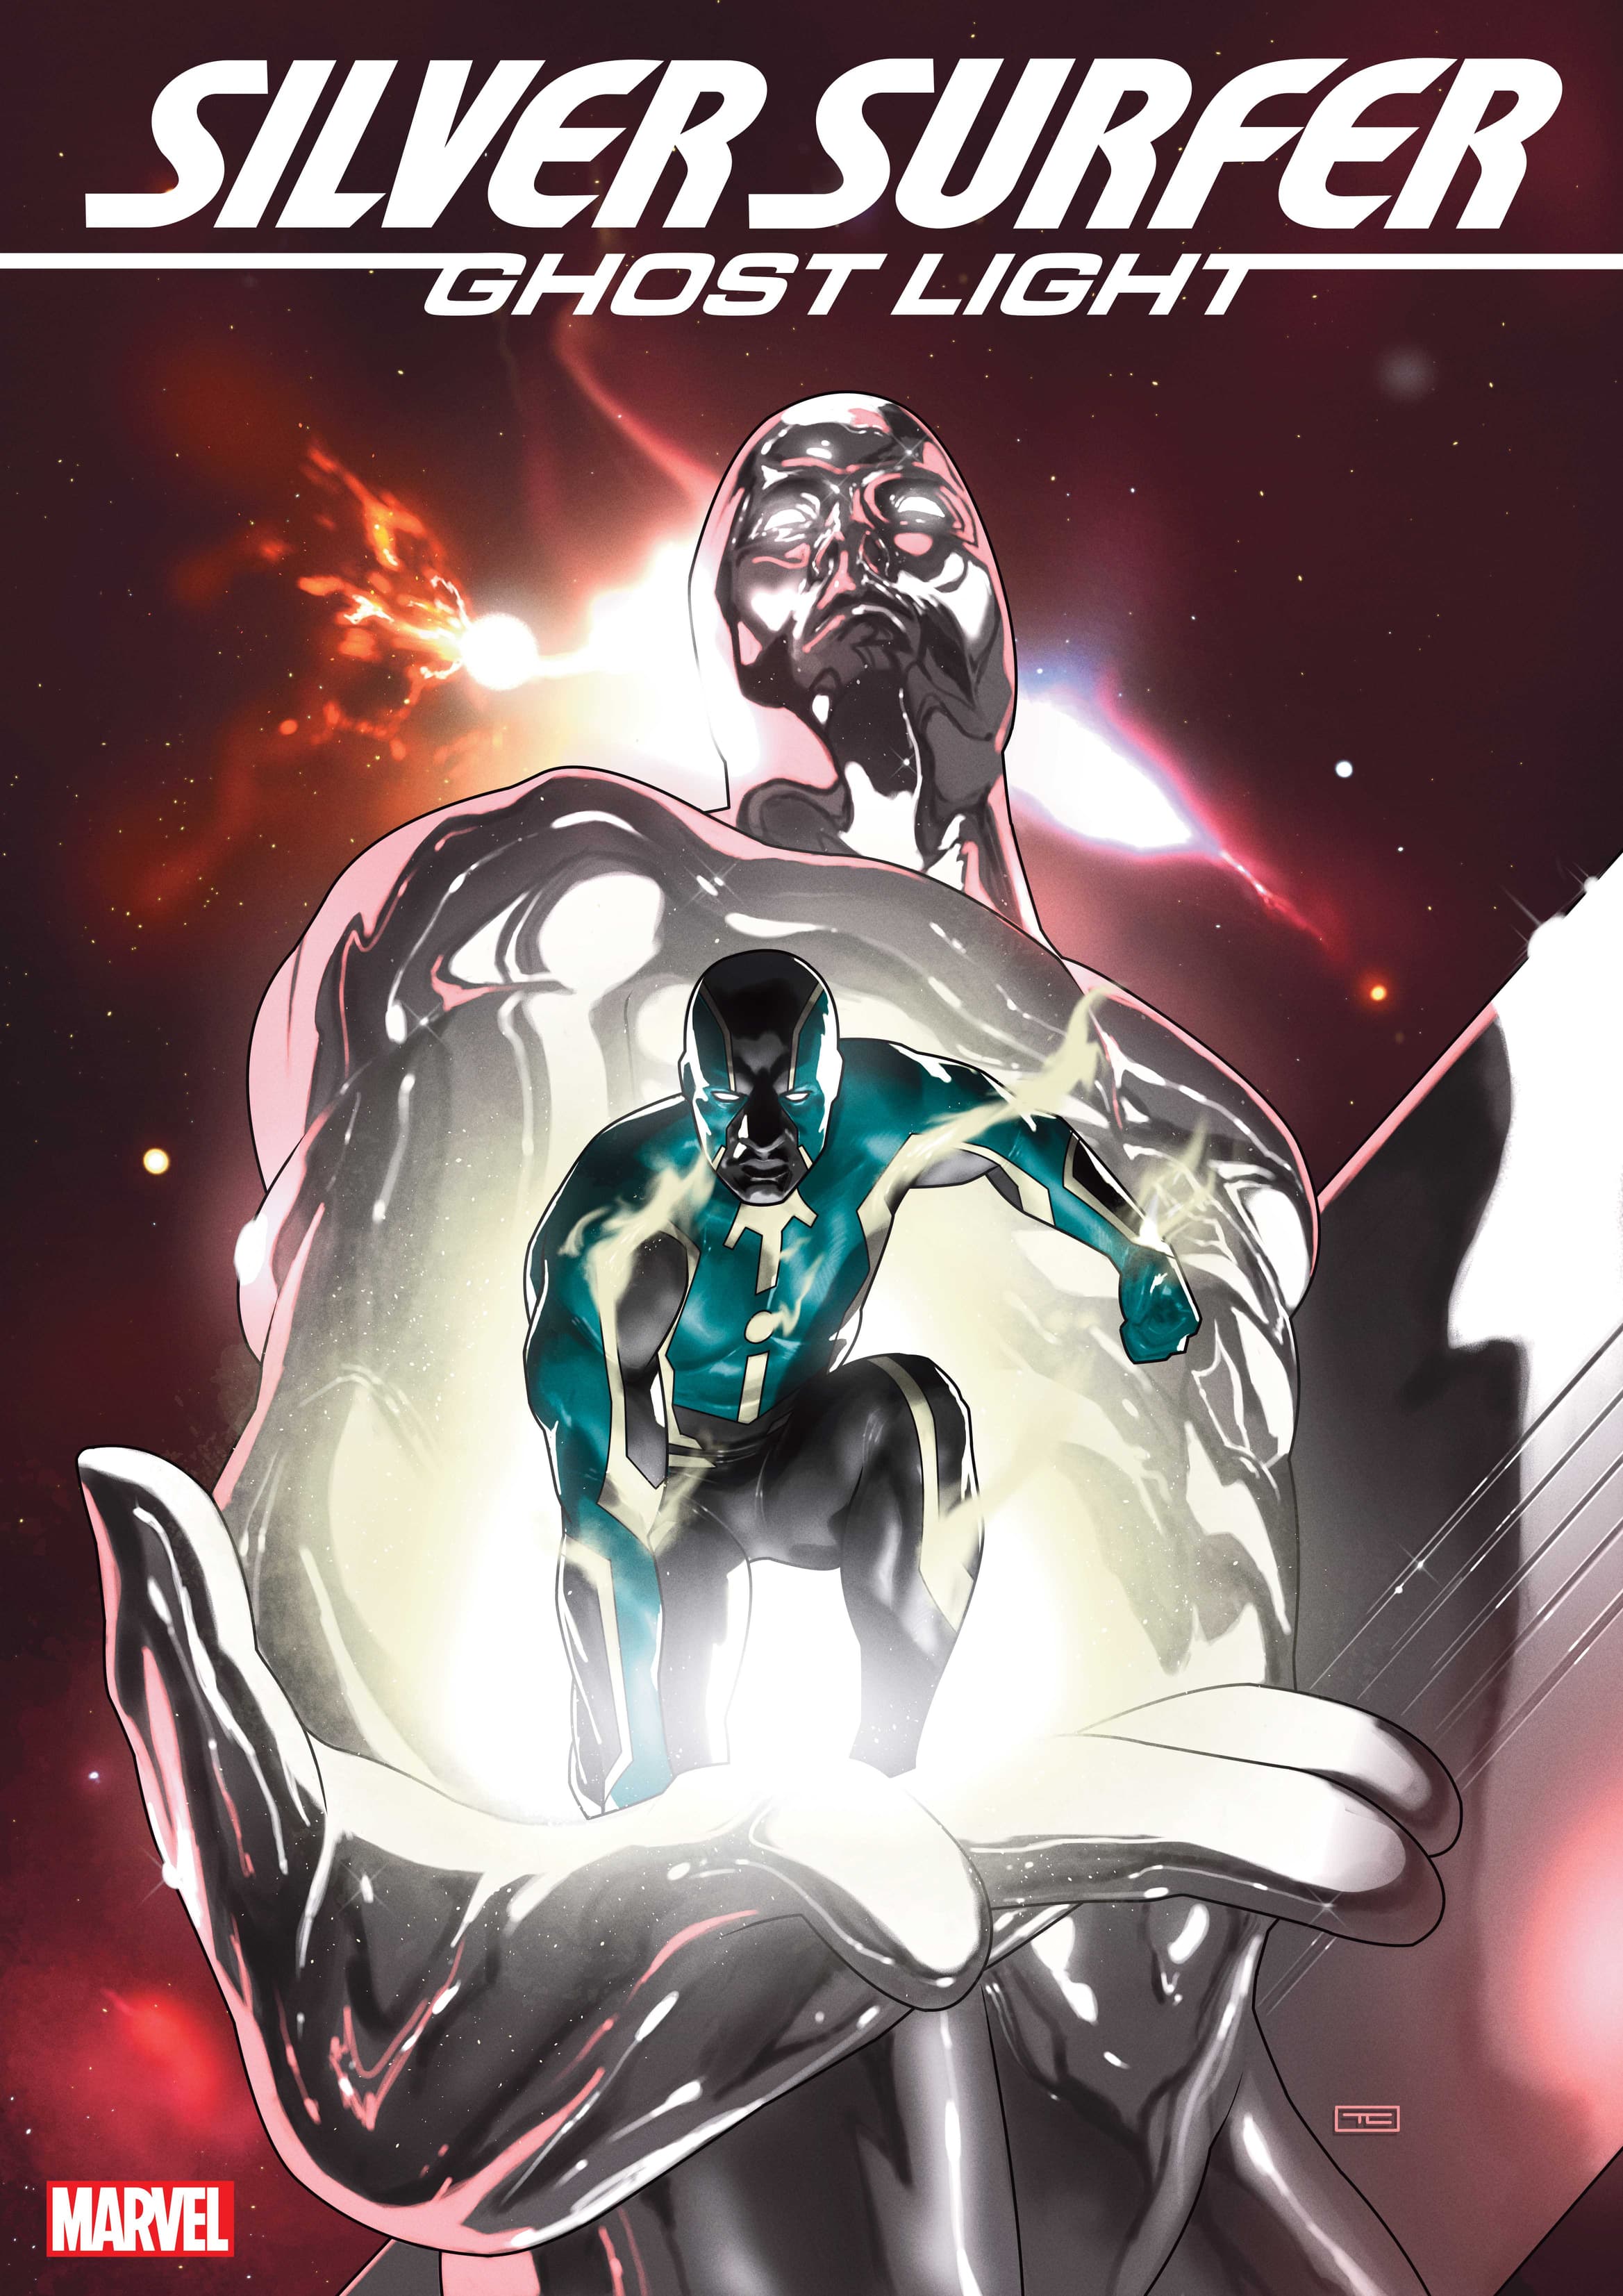 SILVER SURFER: GHOST LIGHT #1 Cover by TAURIN CLARKE